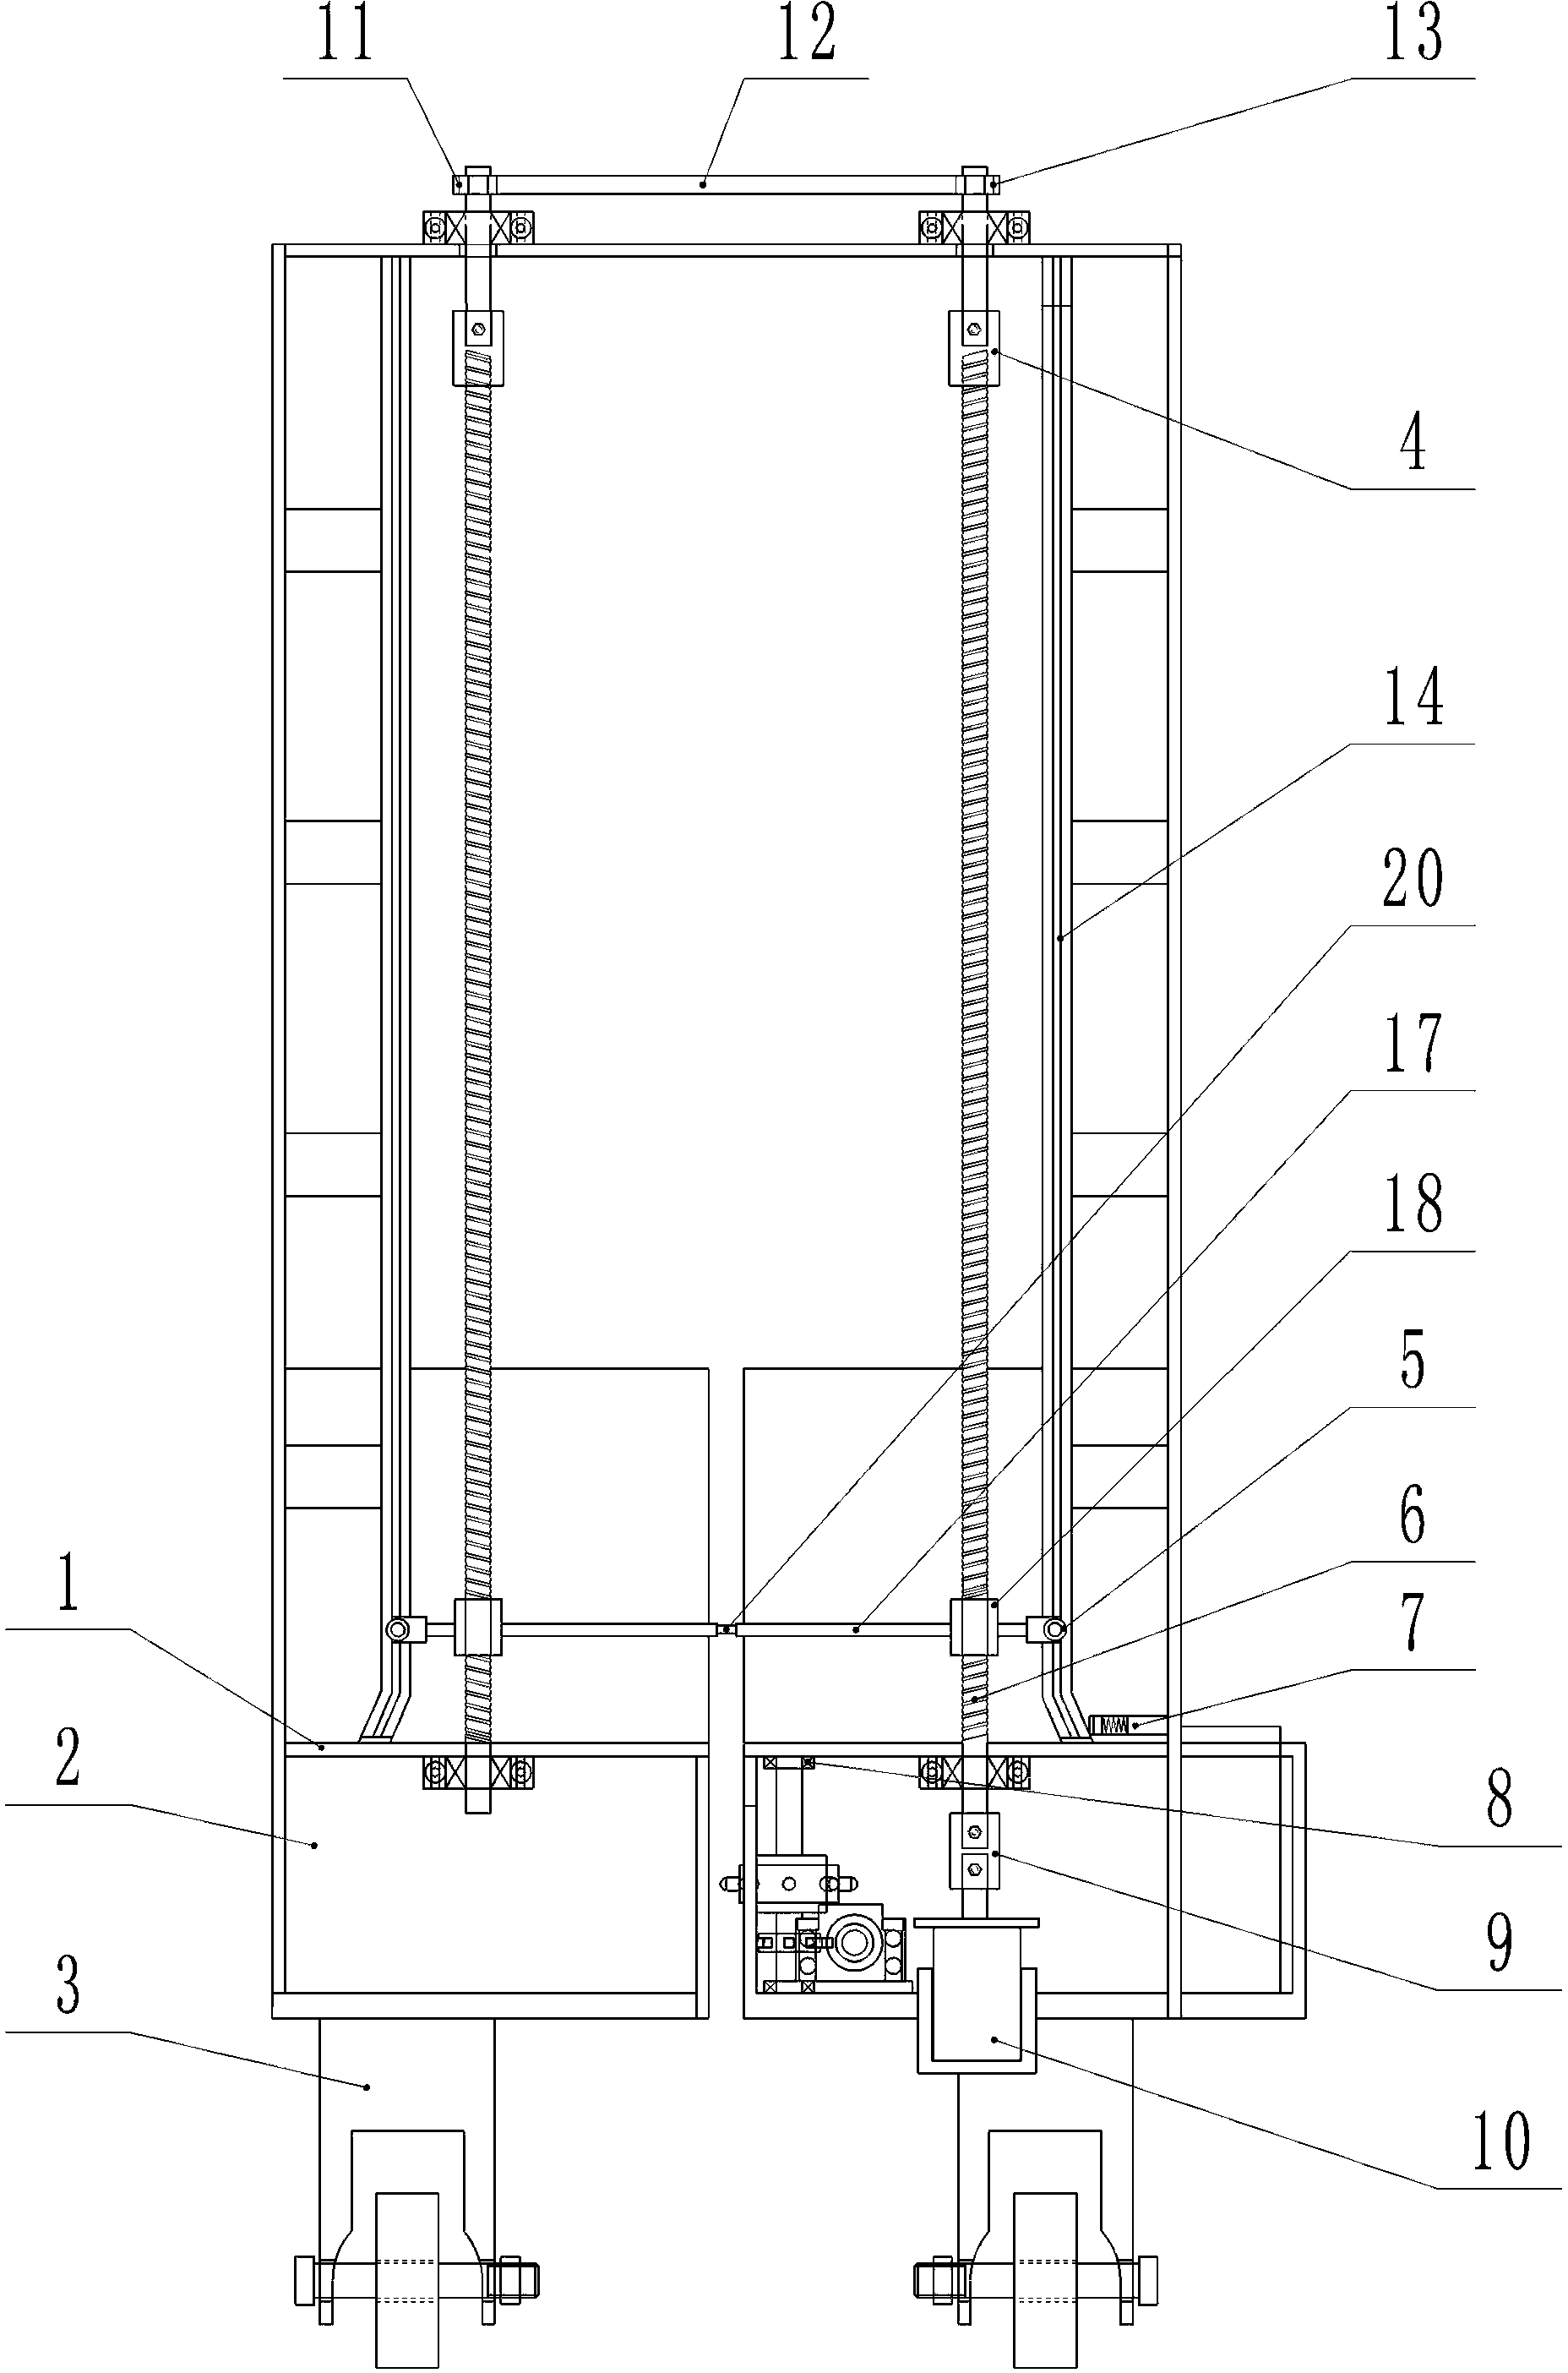 Mulberry leaf picking device of automatic worm and gear type driving mulberry leaf picking machine